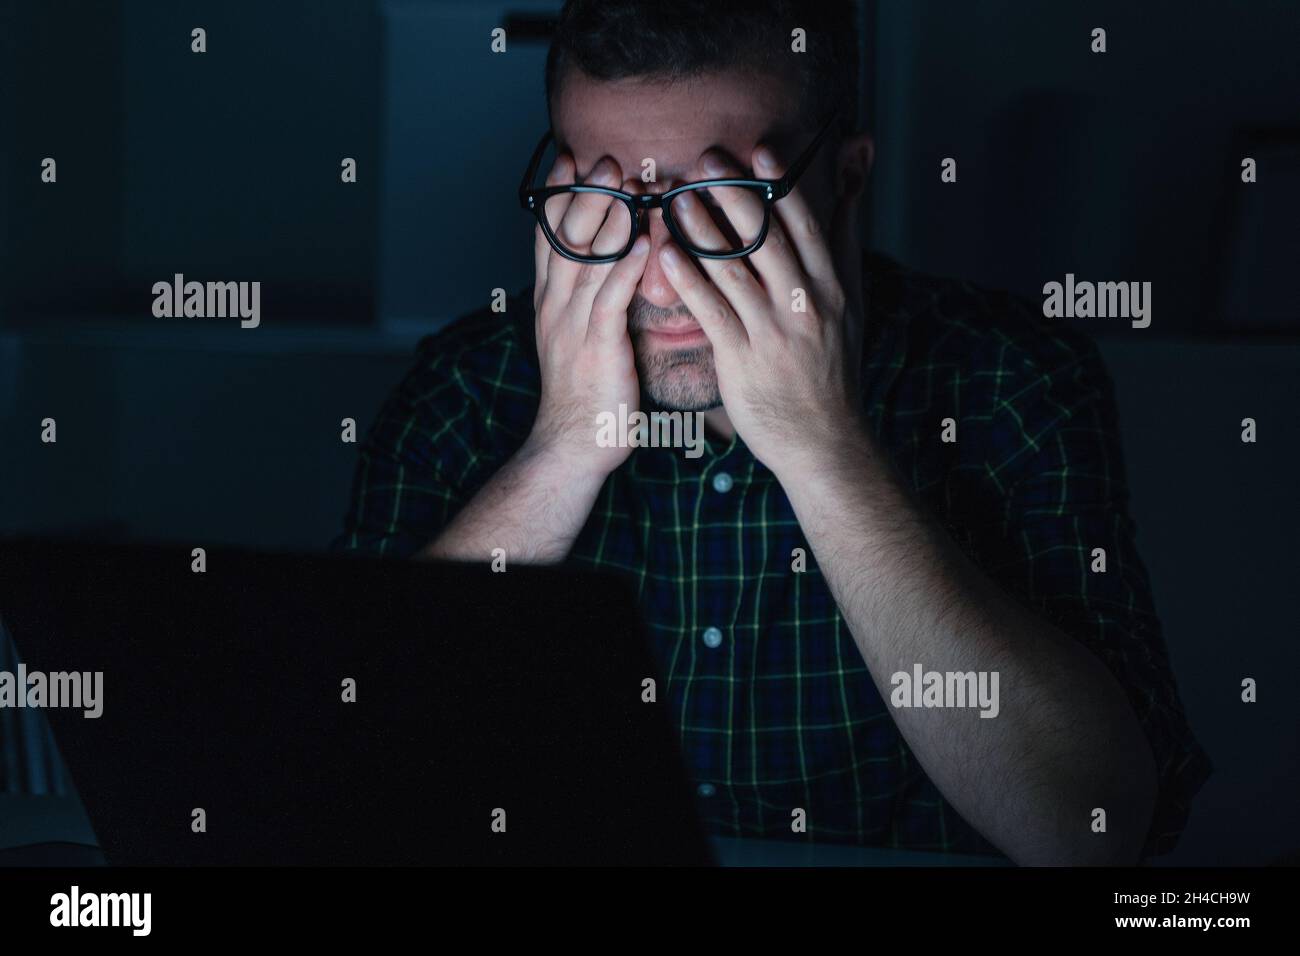 Man with eye strain computer problem at night Stock Photo